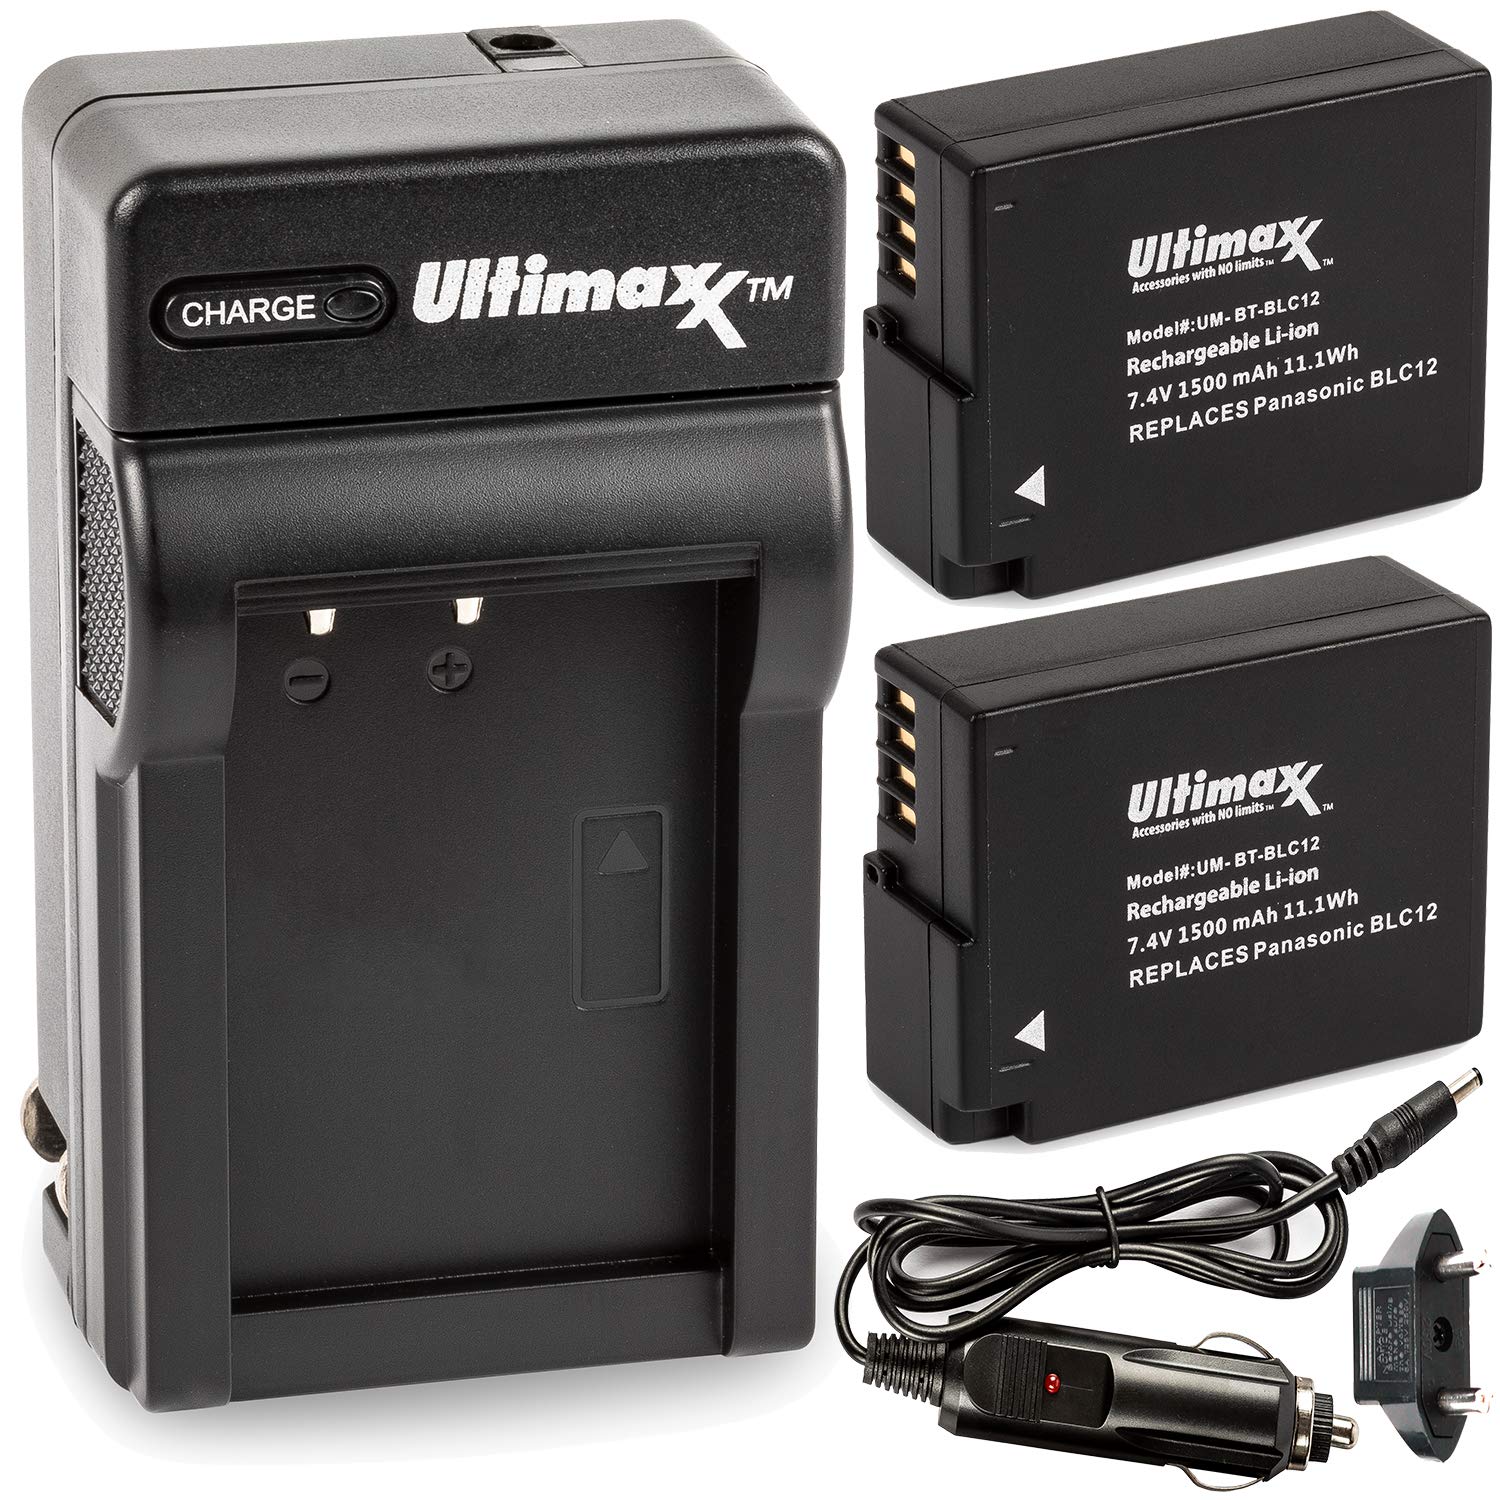 Ultimaxx AC/DC Rapid Home & Travel Charger with 2 BLC12 Extended Life Batteries